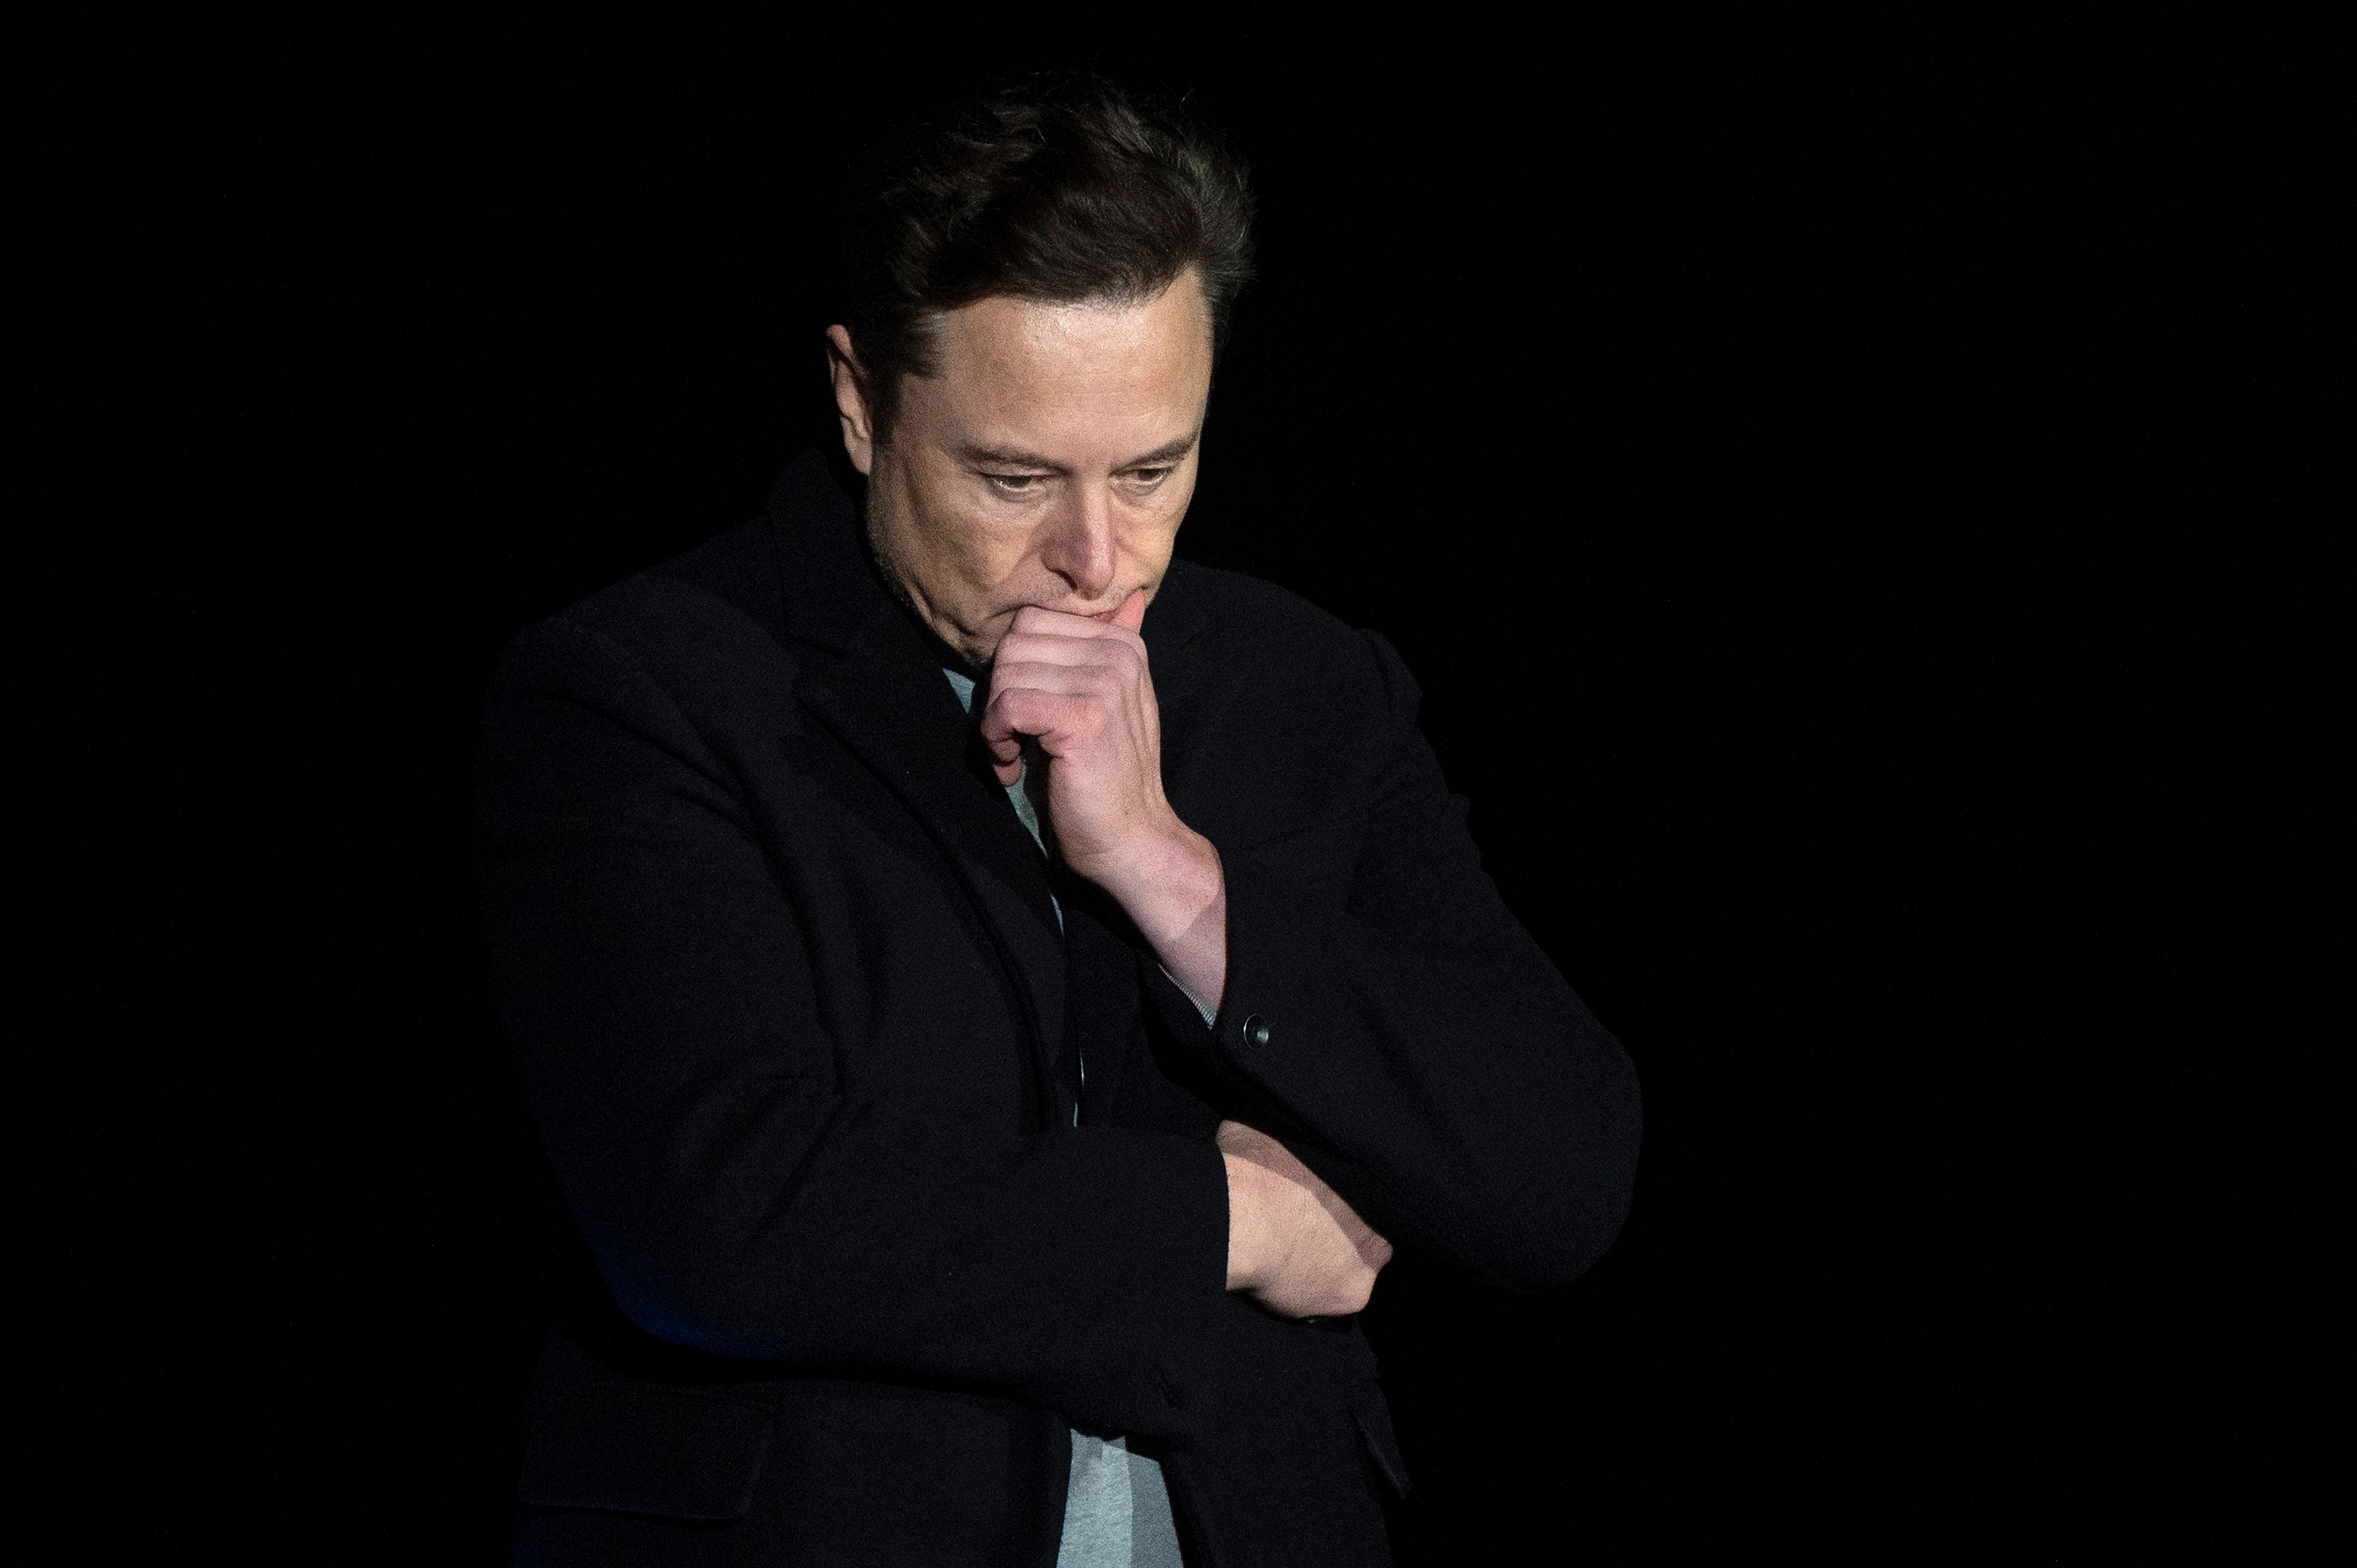 Elon Musk pauses as he speaks during a press conference at SpaceX's Starbase facility near Boca Chica Village in South Texas on February 10, 2022. | Source: Getty Images